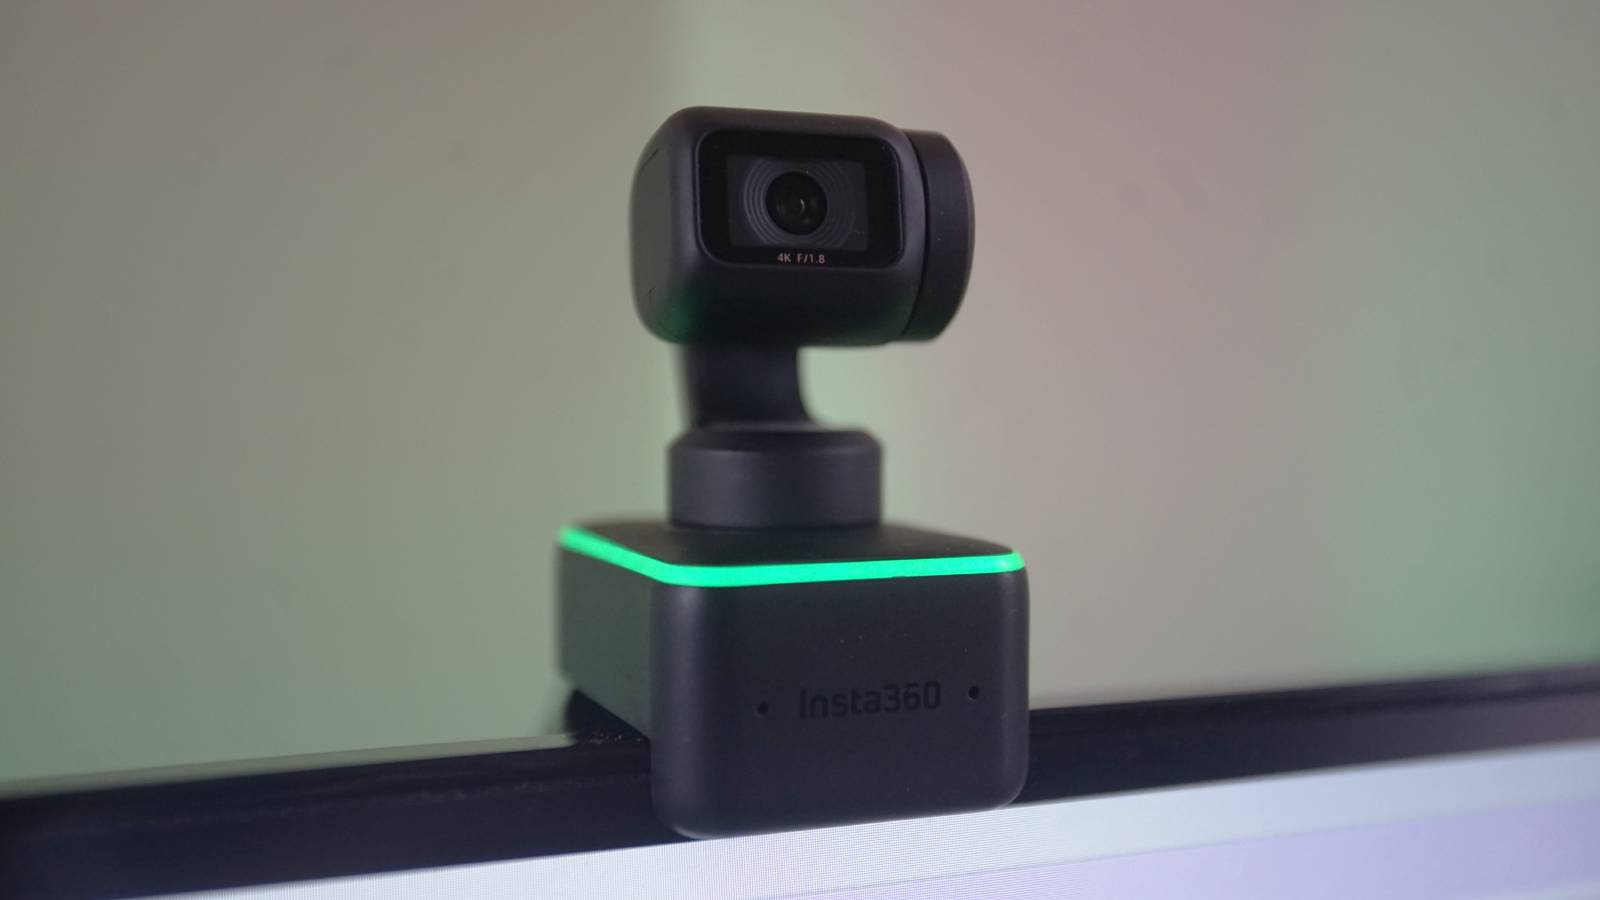 A close up shot shows the Insta360 Link Webcam, a matte black web camera on a gimbal, with green lights running around a cube base